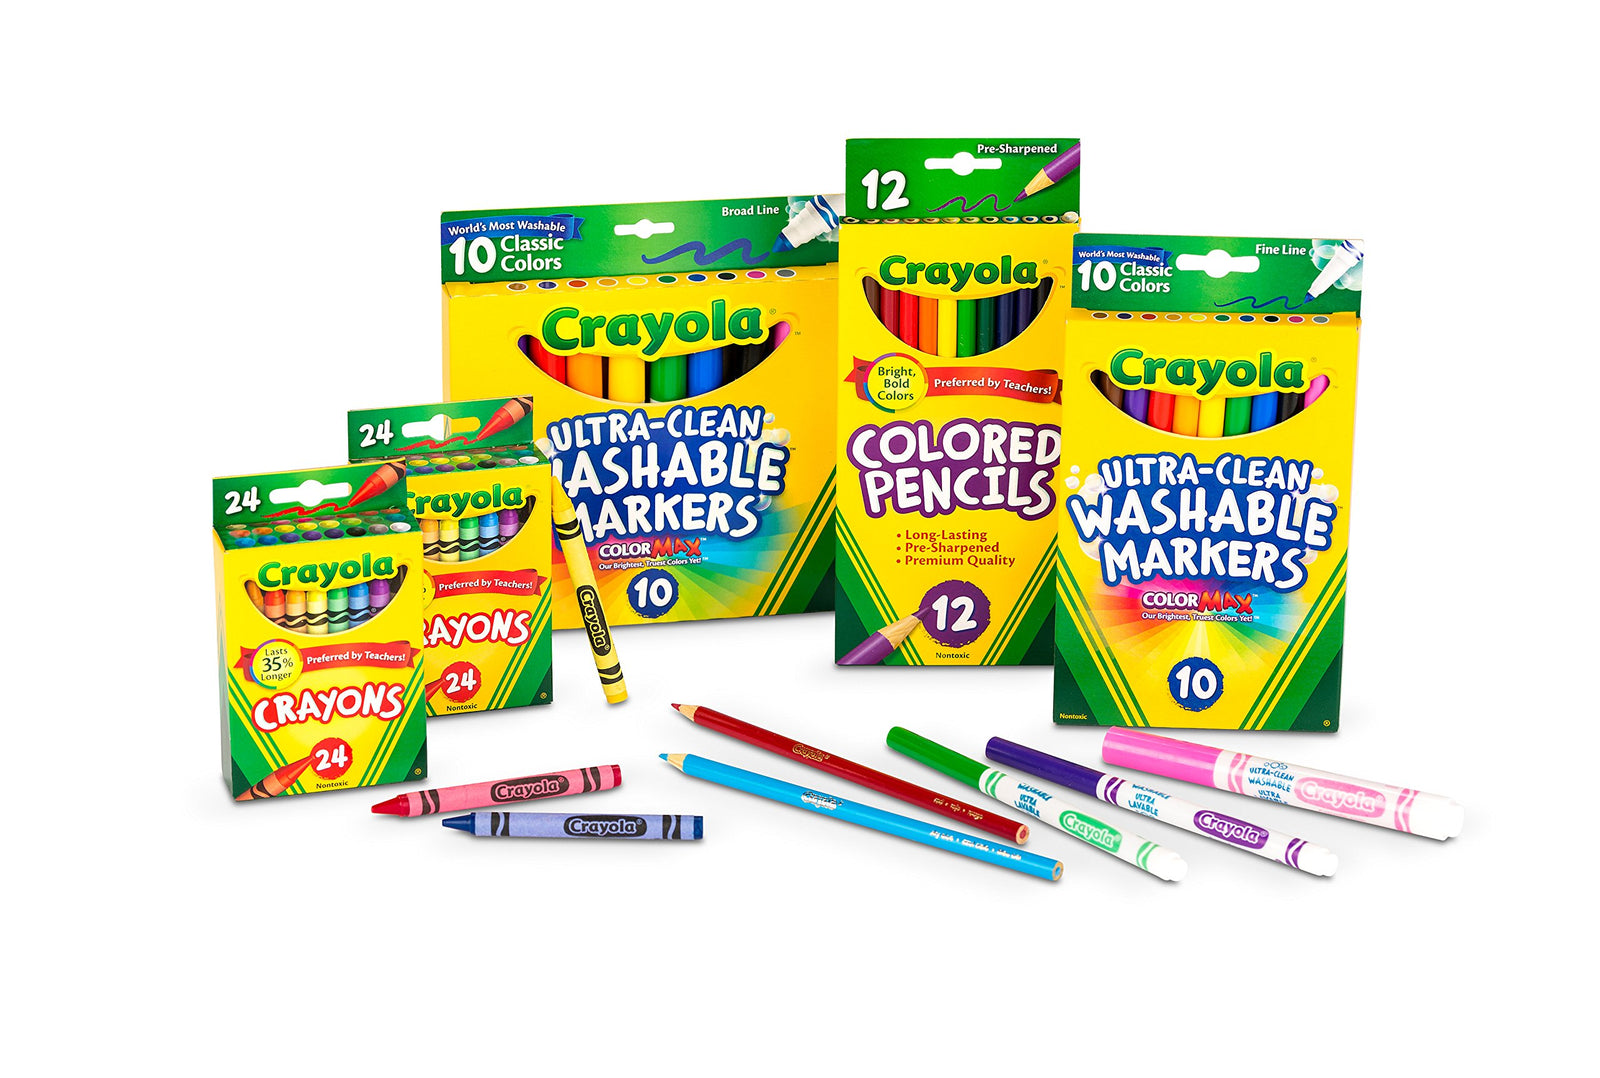 Crayola Back To School Supplies for Girls & Boys, Crayons, Markers & Colored Pencils, Stocking Stuffers, Gifts, 80 Pieces